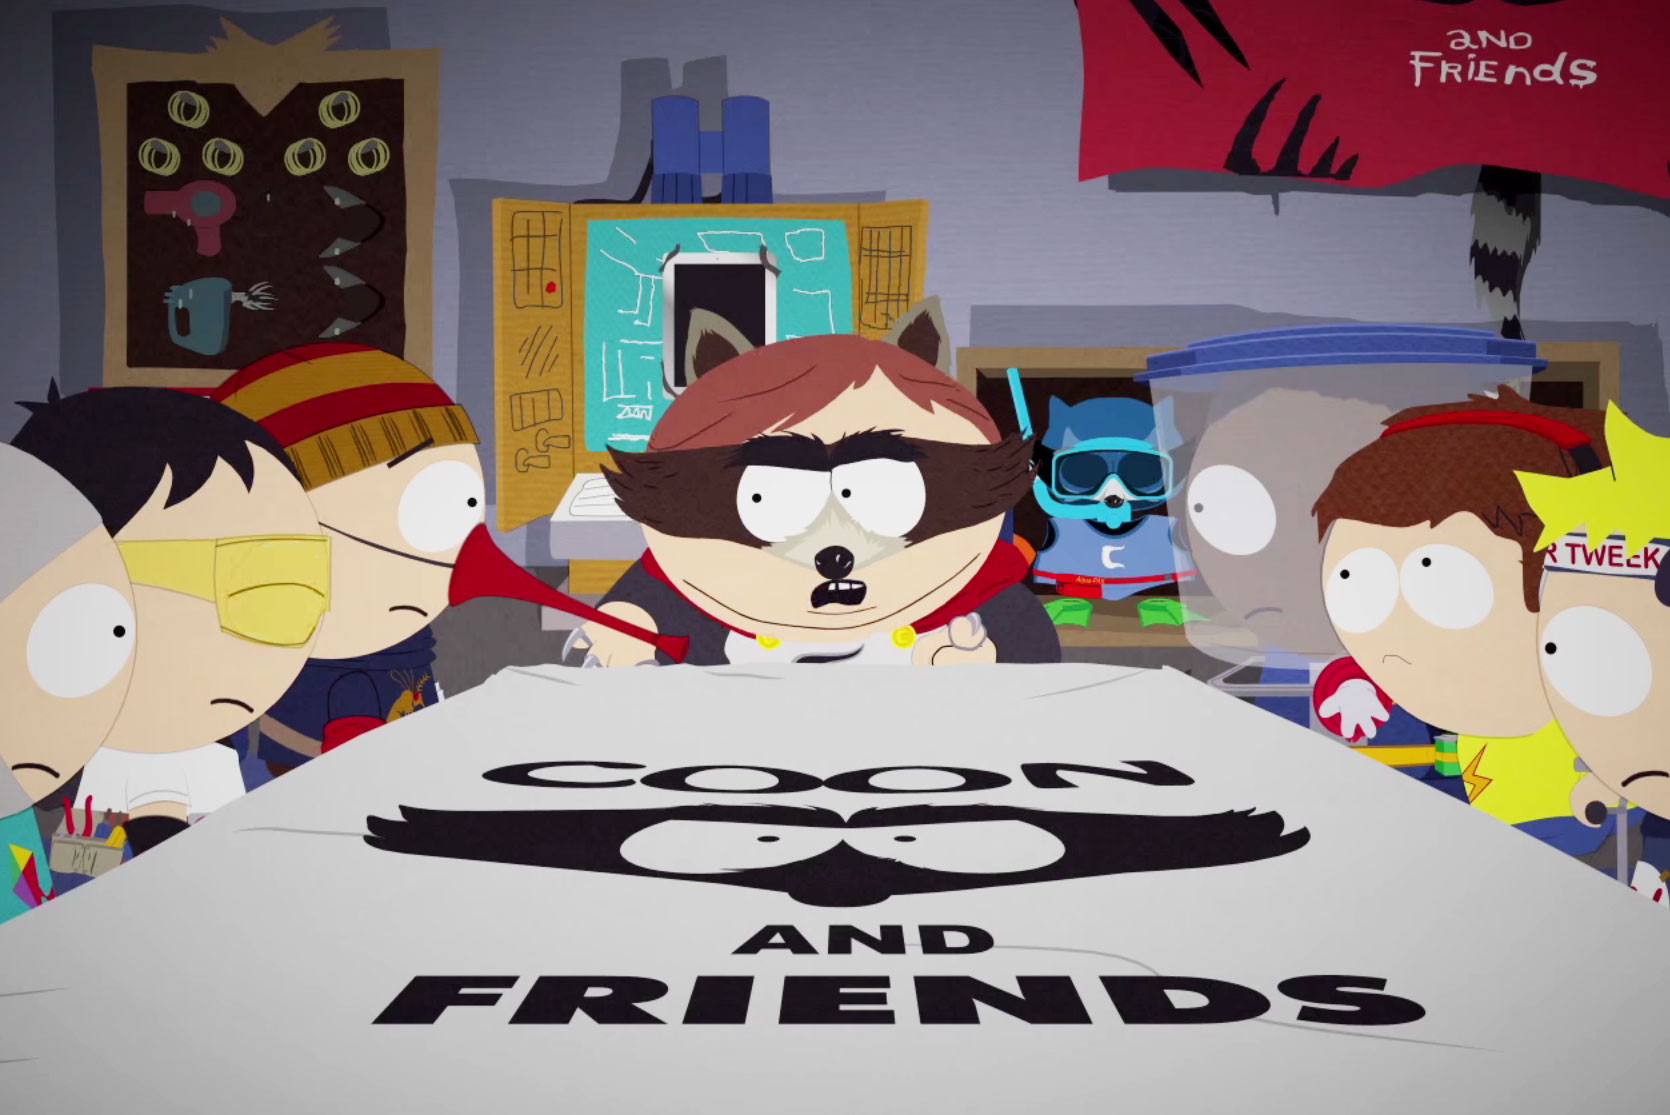 <p>Кадр видео &ldquo;<a href="https://www.youtube.com/watch?v=FwGWETNdtso" target="_blank">South Park: The Fractured but Whole - Трейлер E3 2016</a>&rdquo;. Скриншот &copy; L!FE</p>